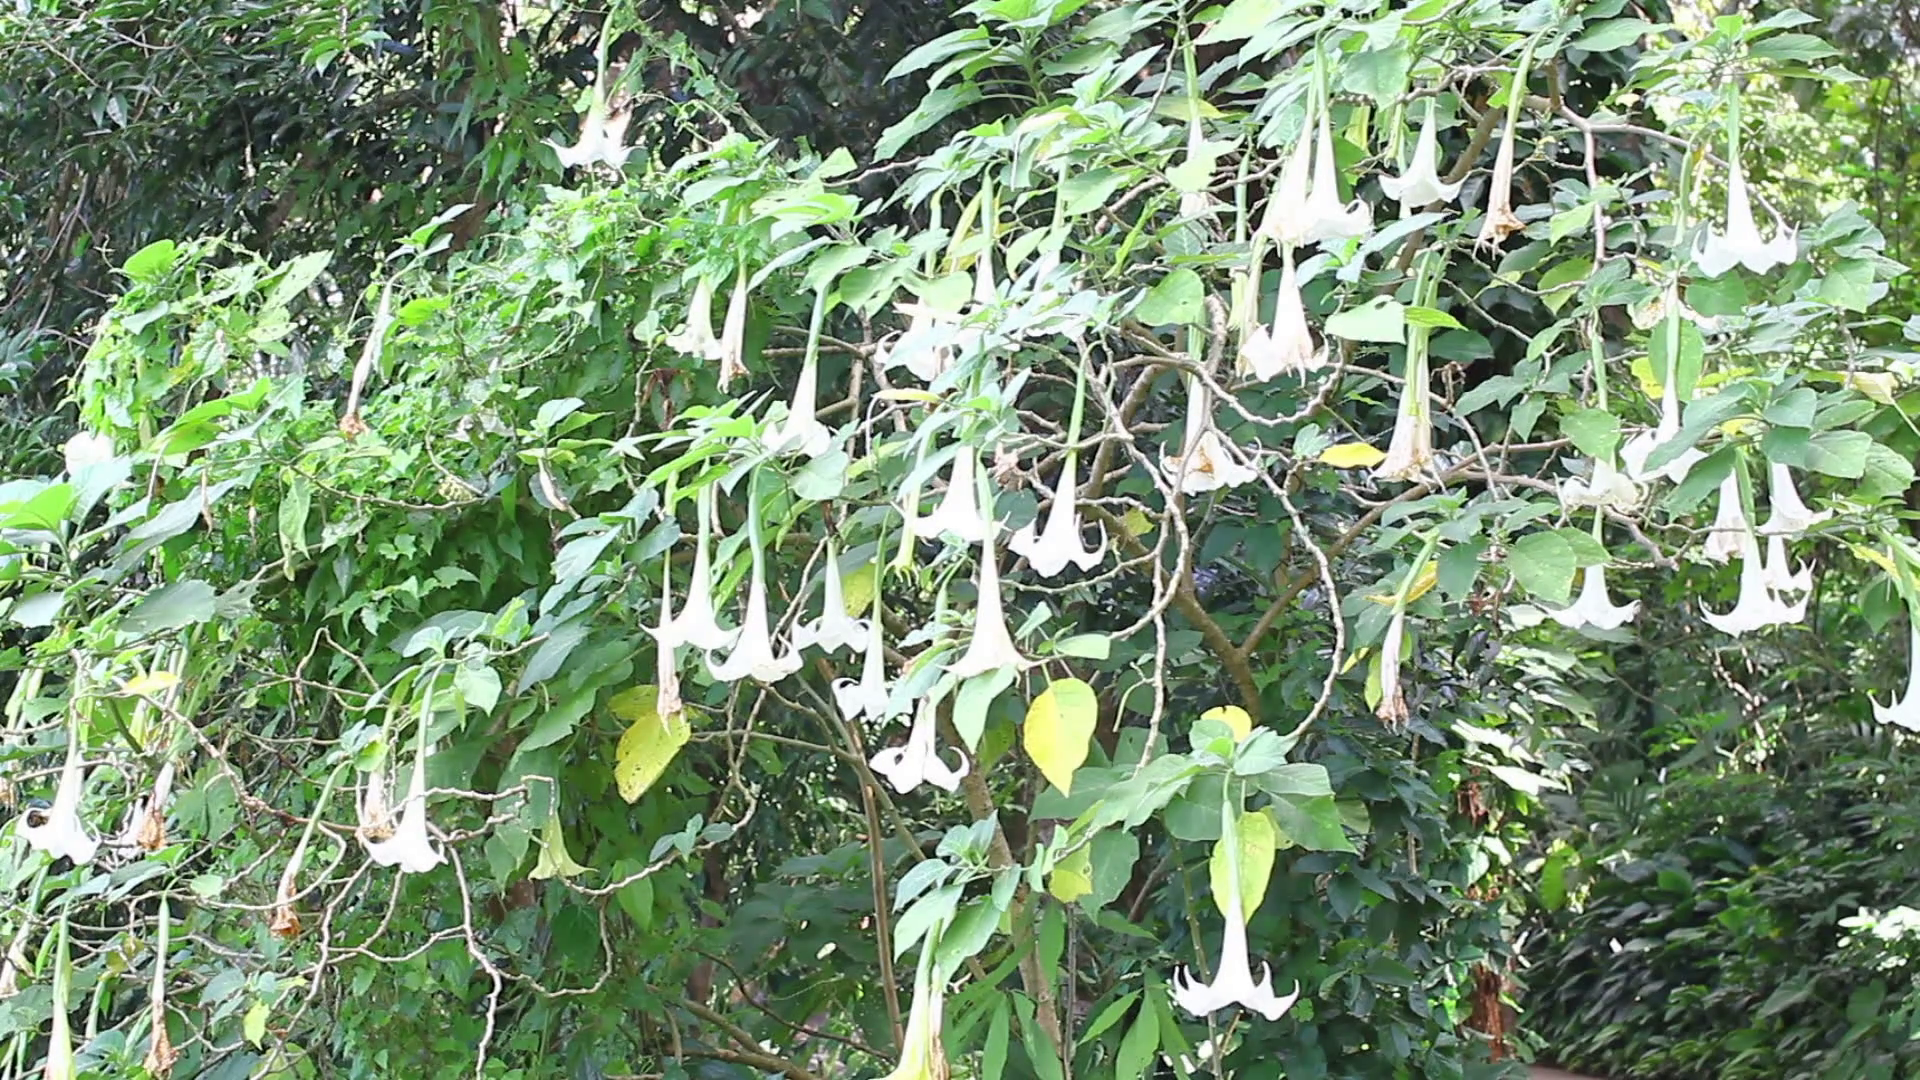 Tree Full Of Angels Png - Angelu0027S Trumpet Flower Or Datura Flower On The Tree Stock Video Footage   Videoblocks, Transparent background PNG HD thumbnail